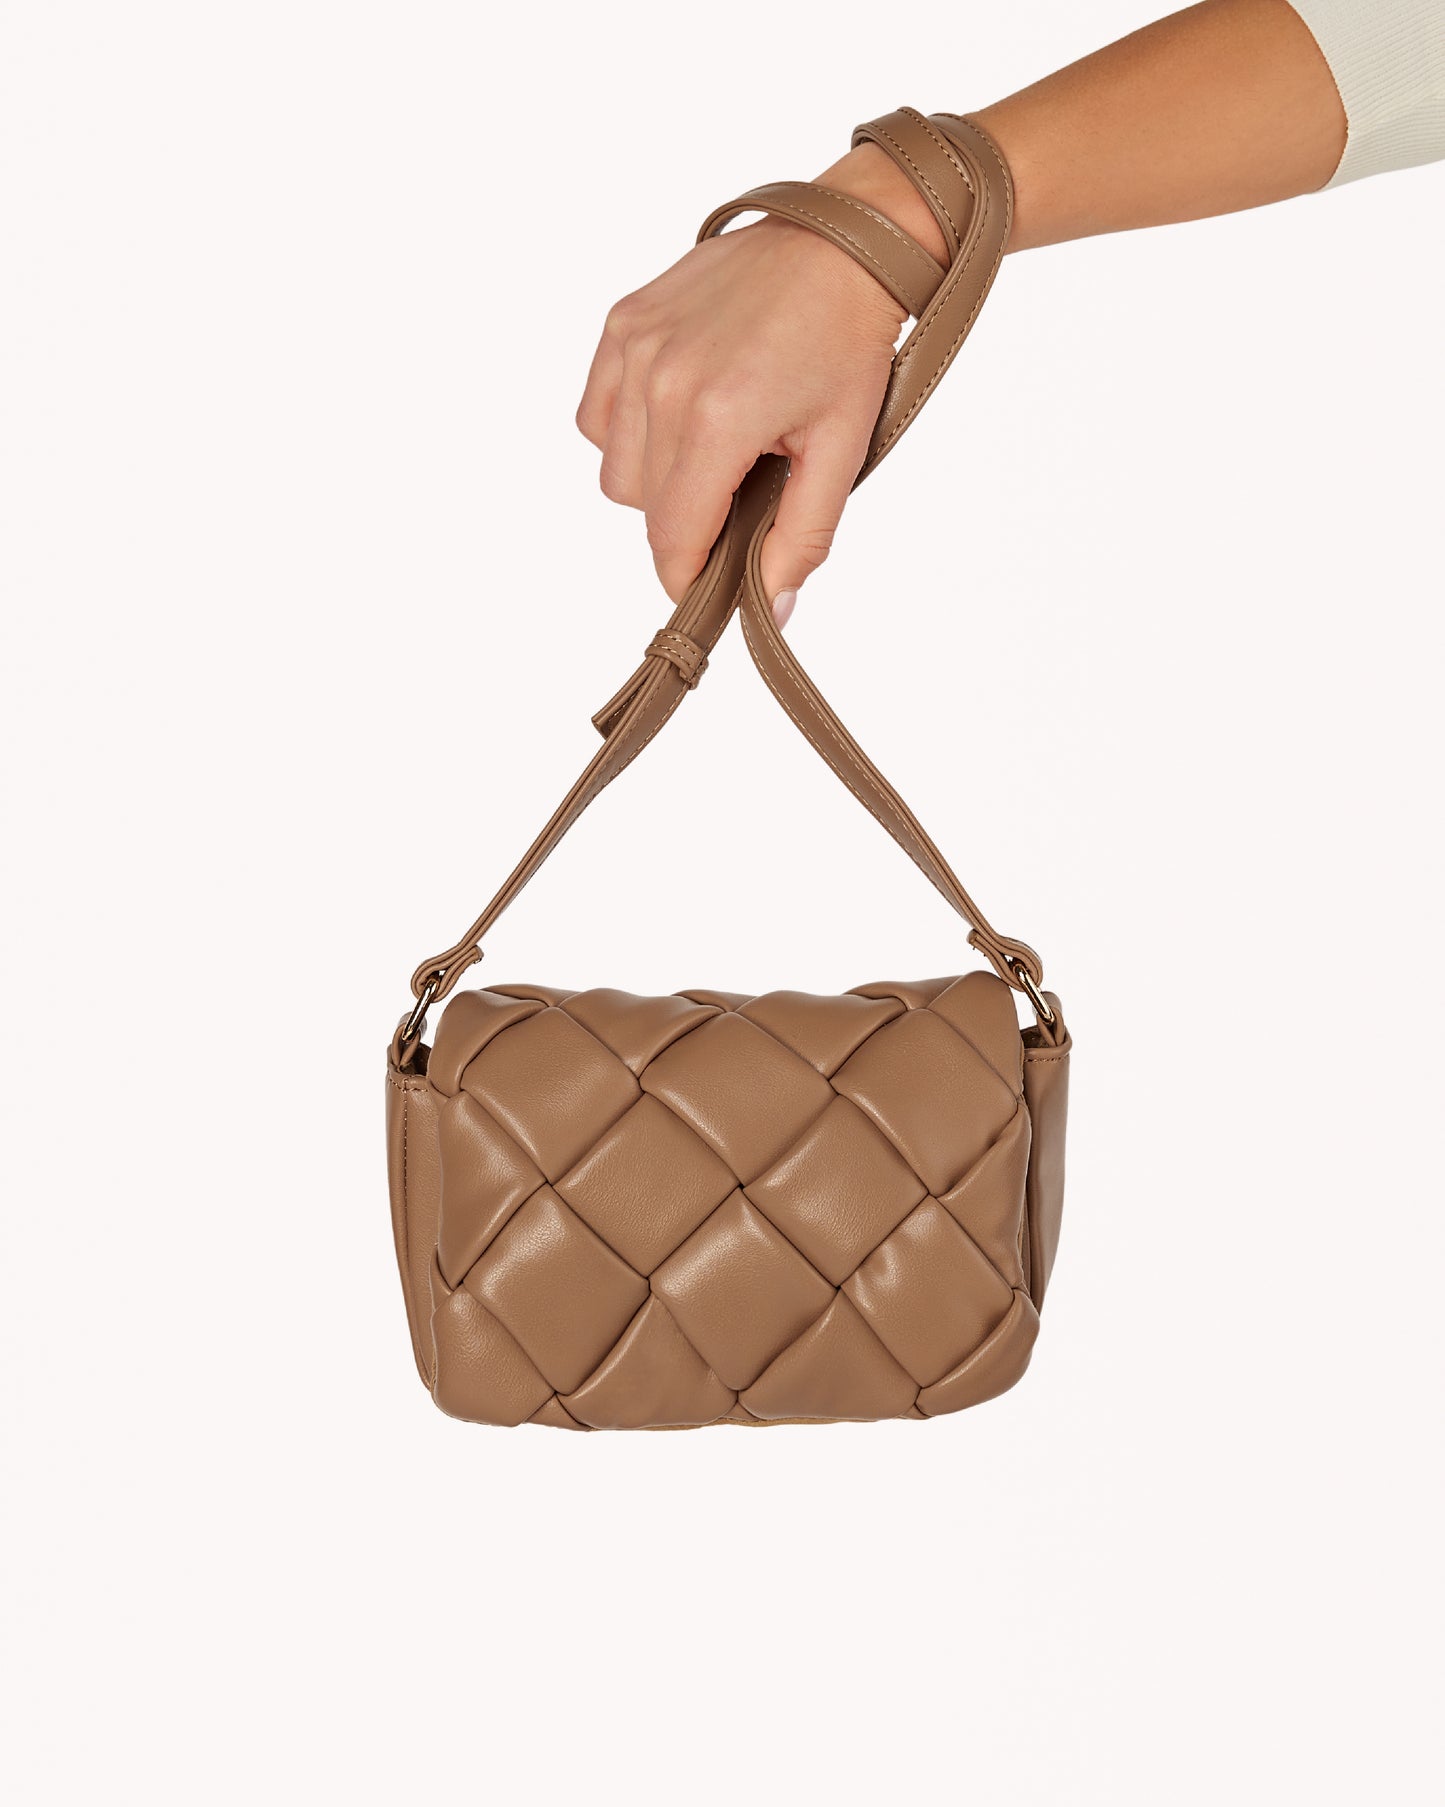 Tan quilted purse with an adjustable crossbody strap